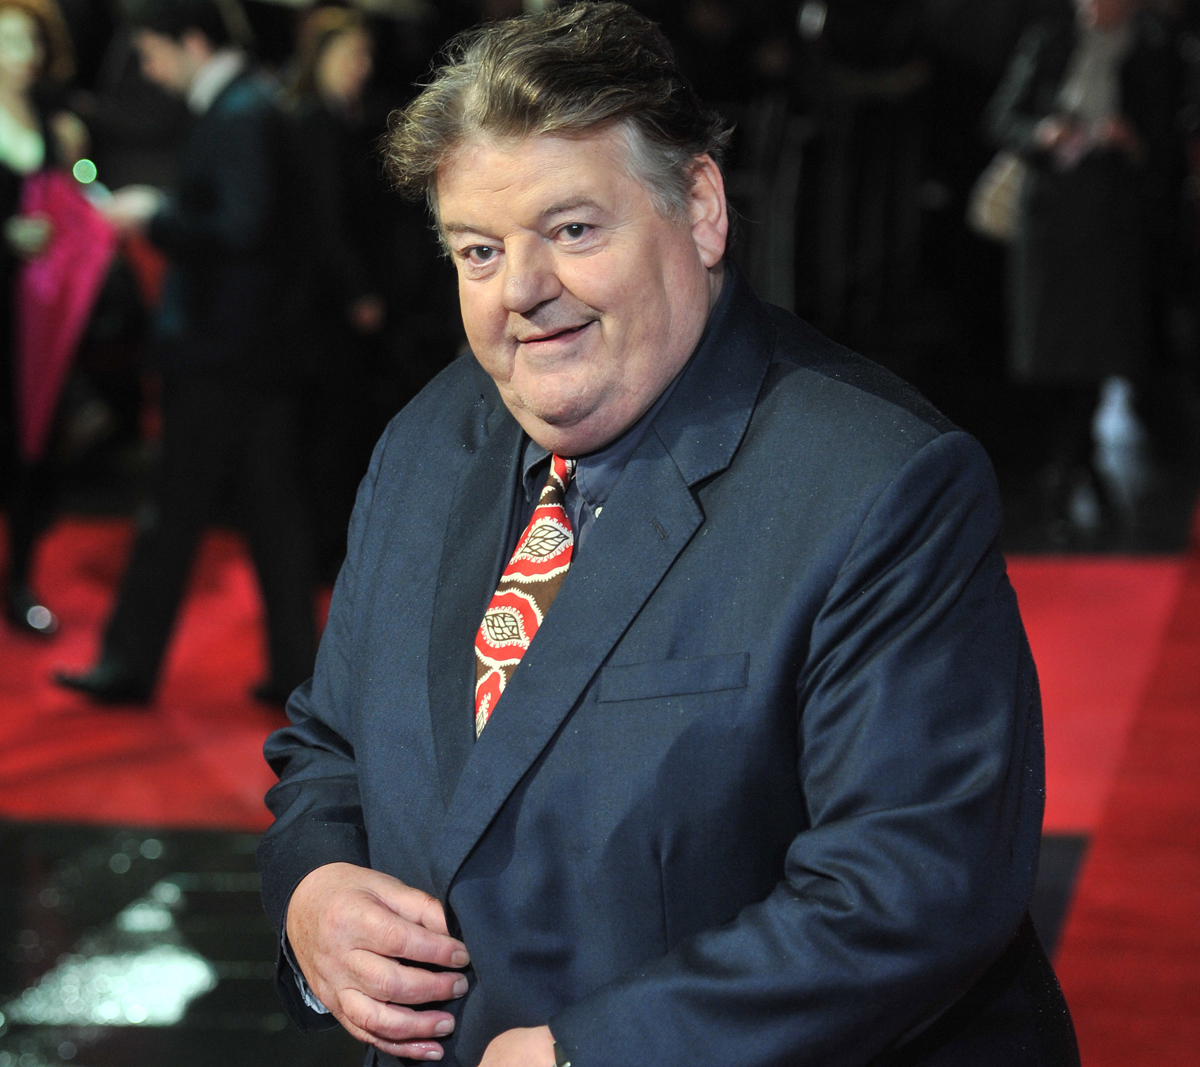 #Harry Potter Star Robbie Coltrane’s Cause Of Death Revealed